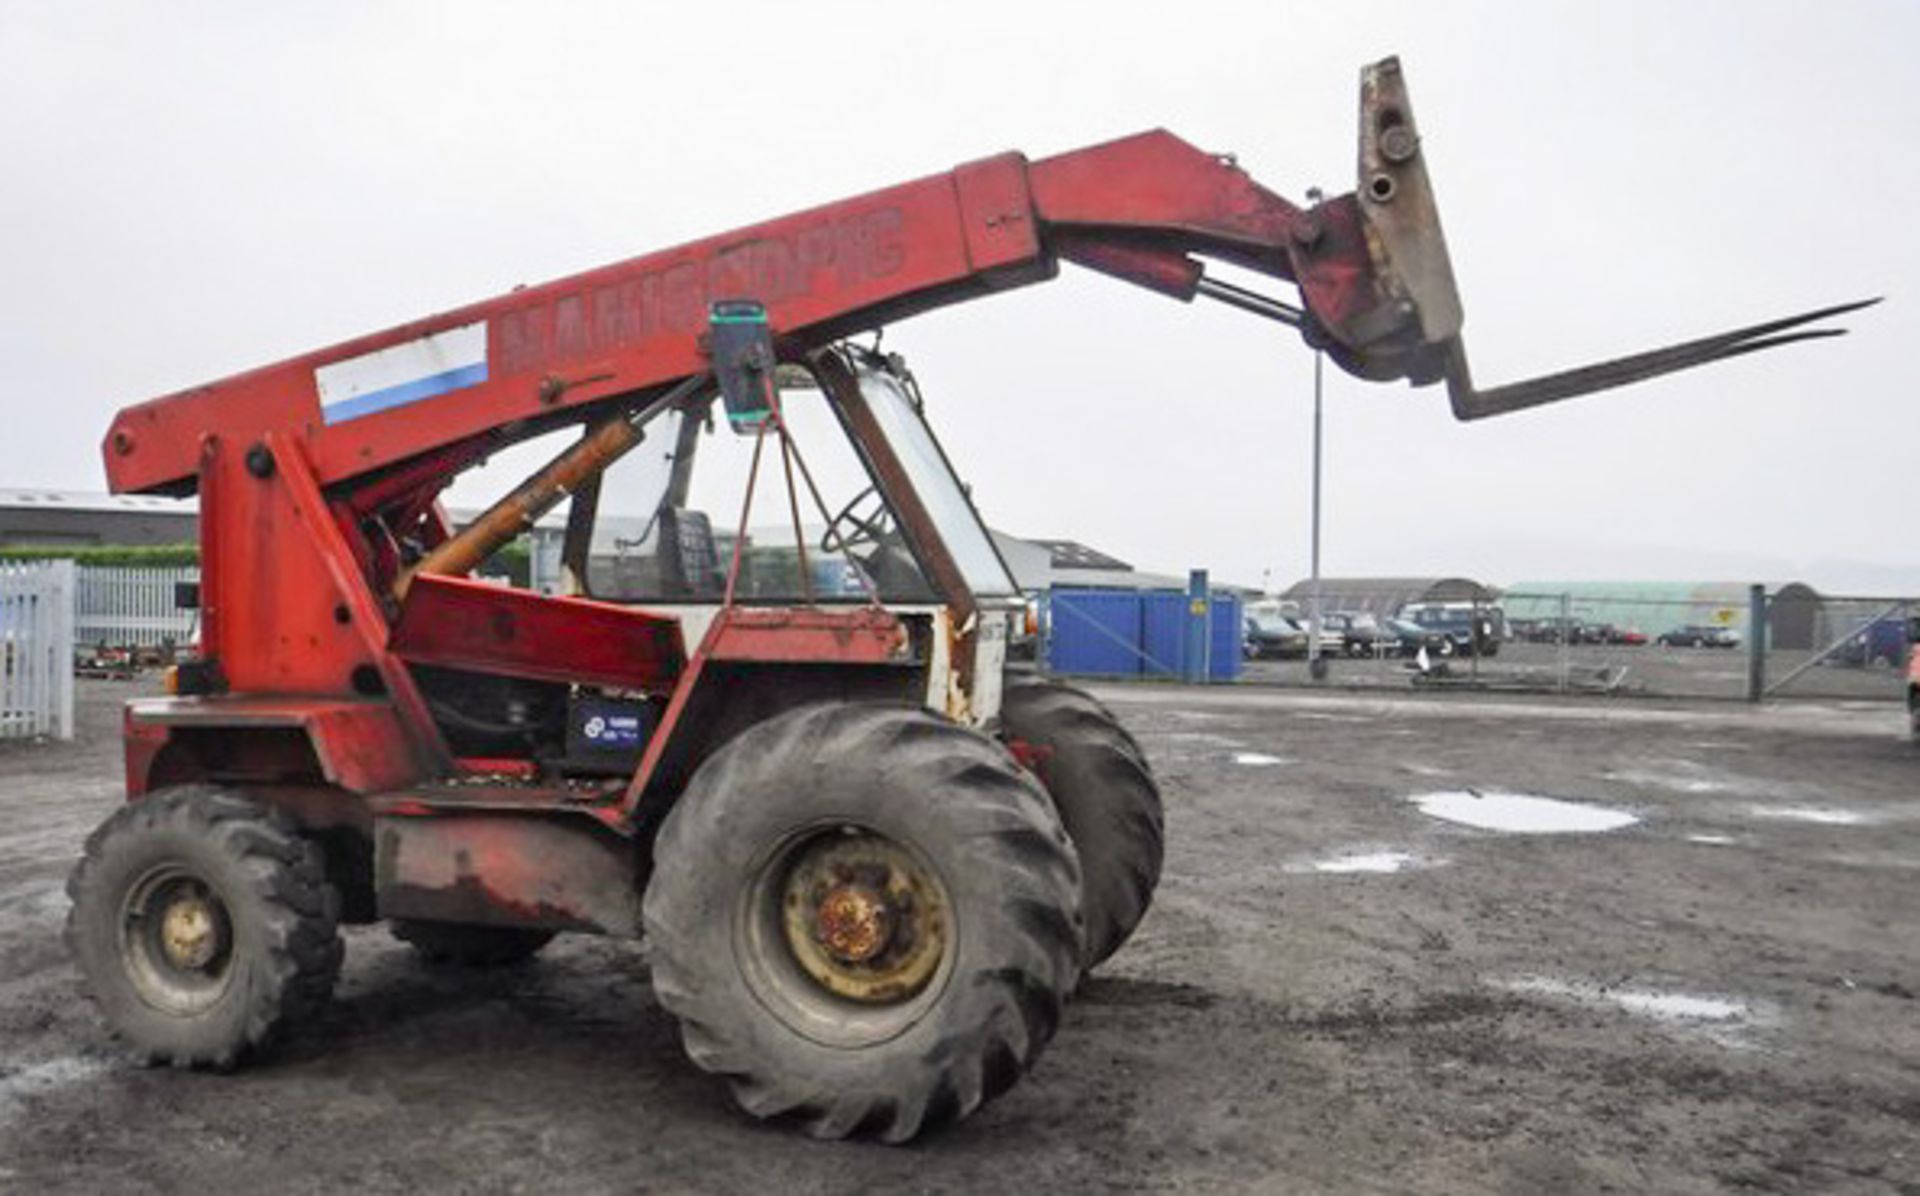 1989 MANITOU TURBO, MODEL - MT425CPT, SERIES 2, CHASSIS 185836, 5693HRS (NOT VERIFIED) ** 10% BUYERS - Image 15 of 15